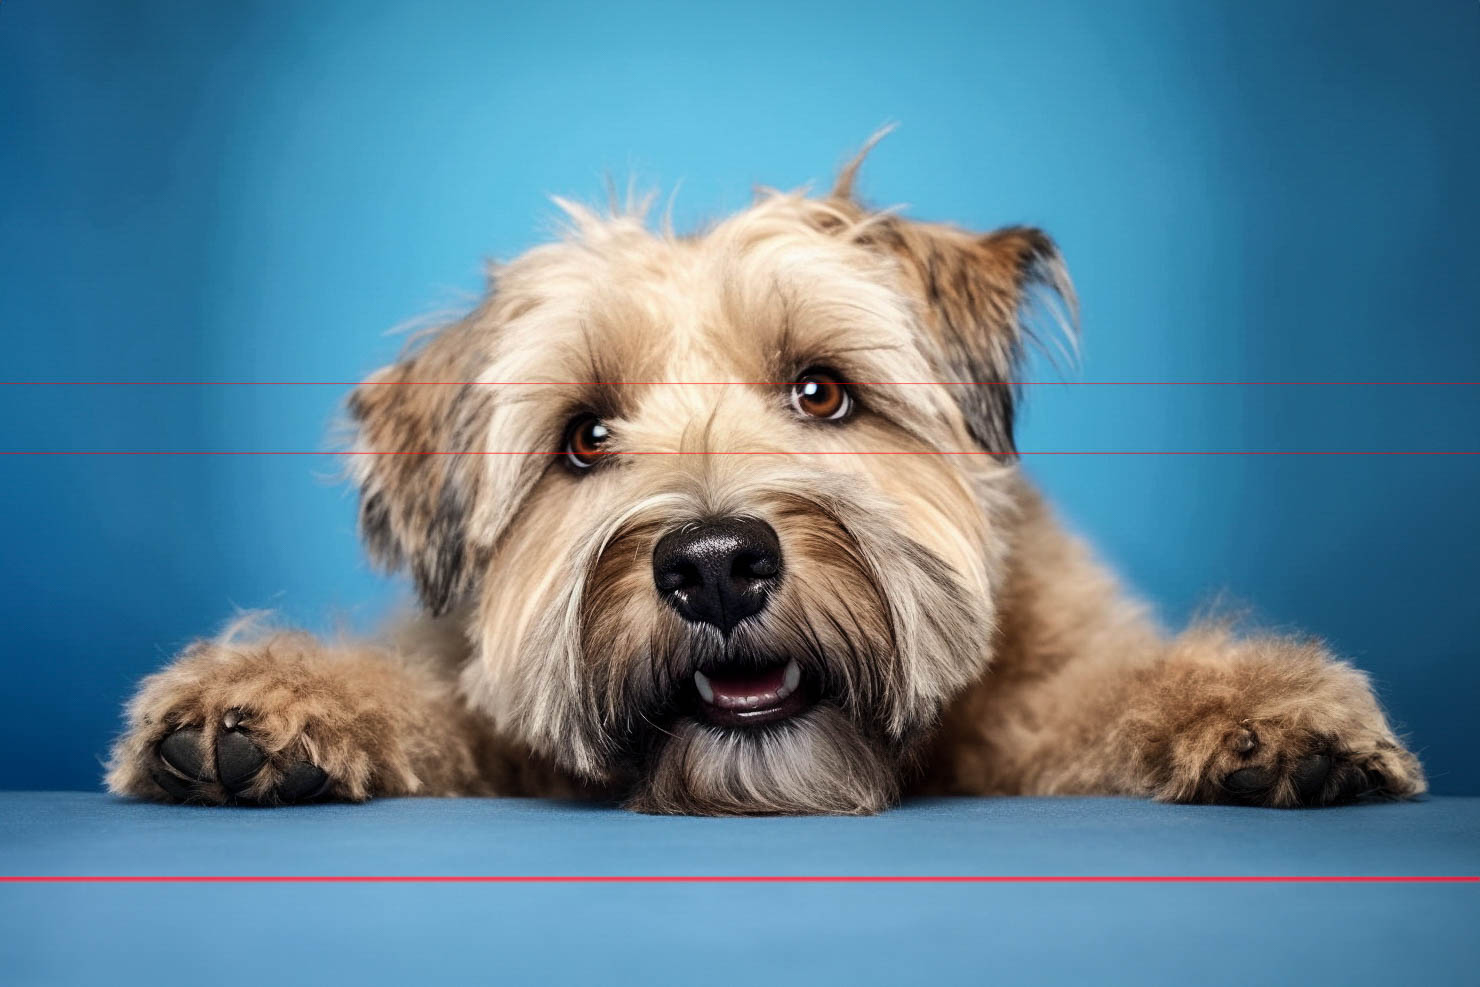 In this picture, a fluffy, Wheaten Terrier with shaggy fur peers over a blue surface, in a playful expression staring directly at the viewer with big, brown eyes and black nose. Its front paws rest on the surface, and its mouth is slightly open. The background is a plain studio backdrop with a gradient light blue color.